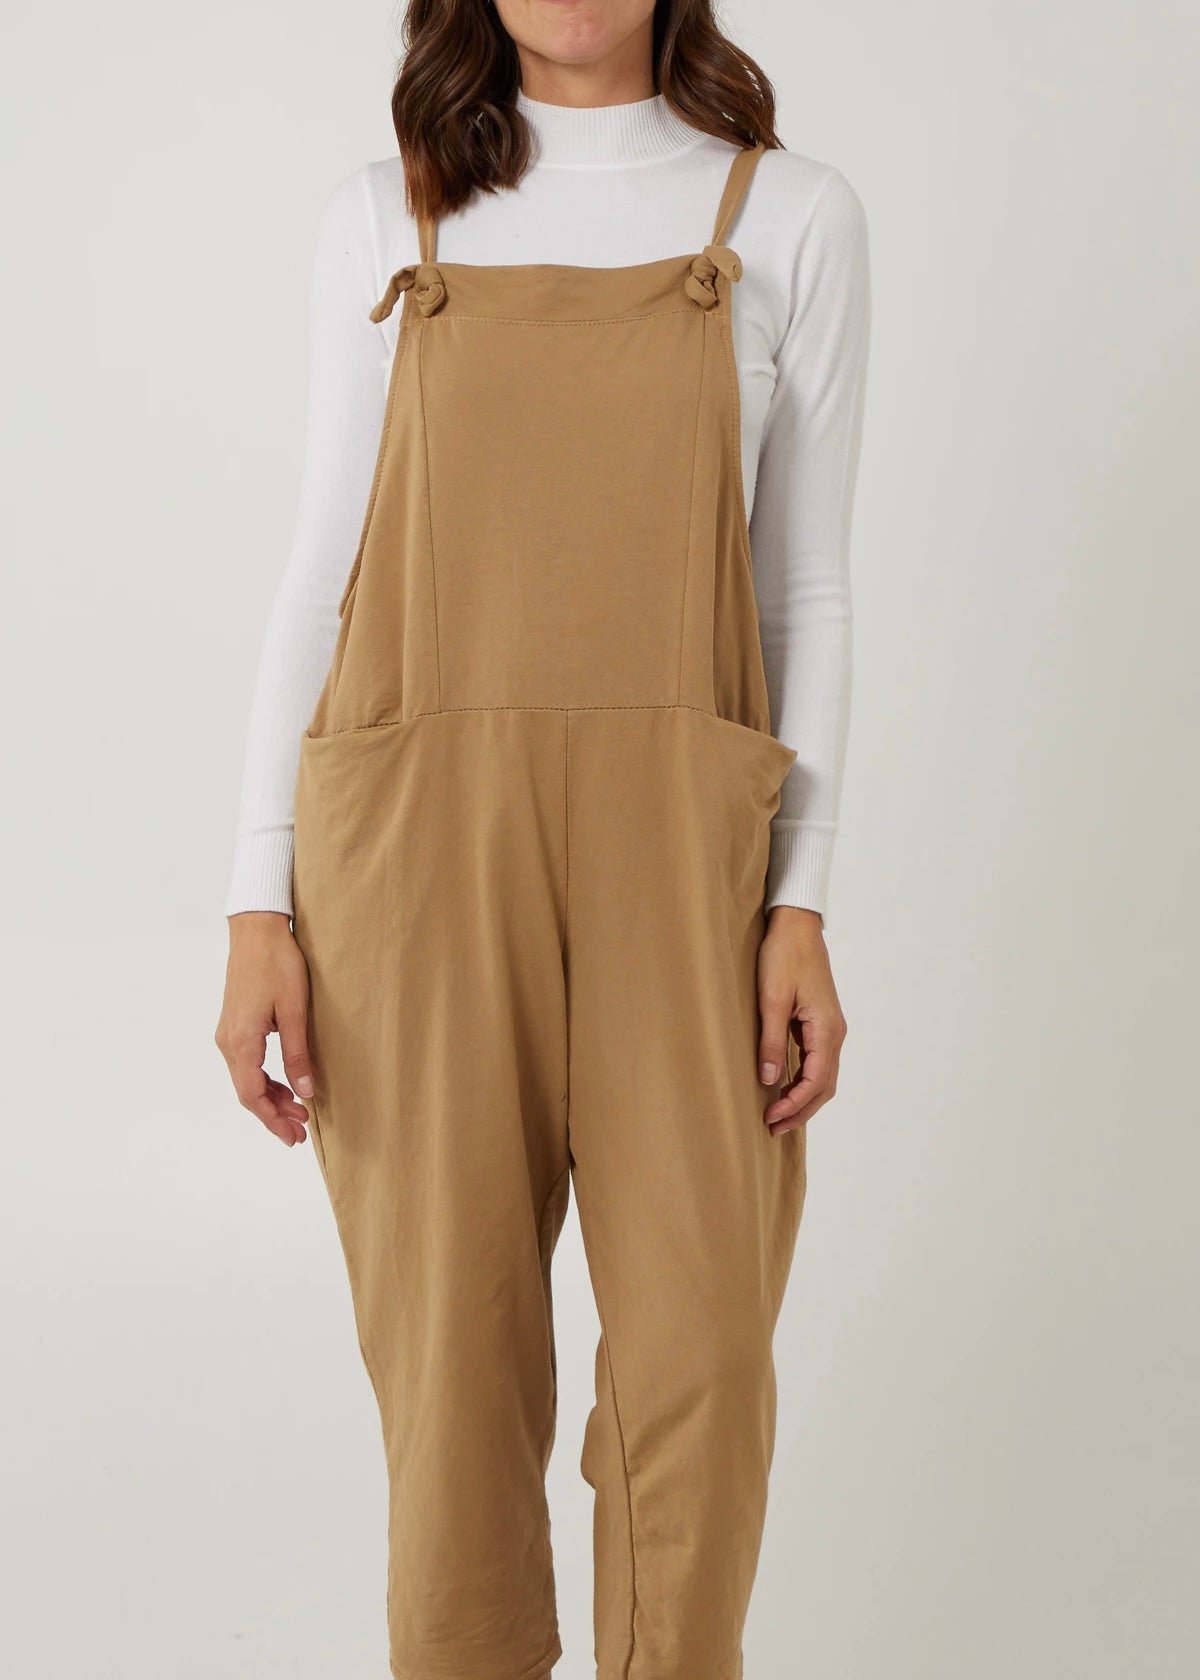 Plain jersey dungarees with tie straps in Mustard